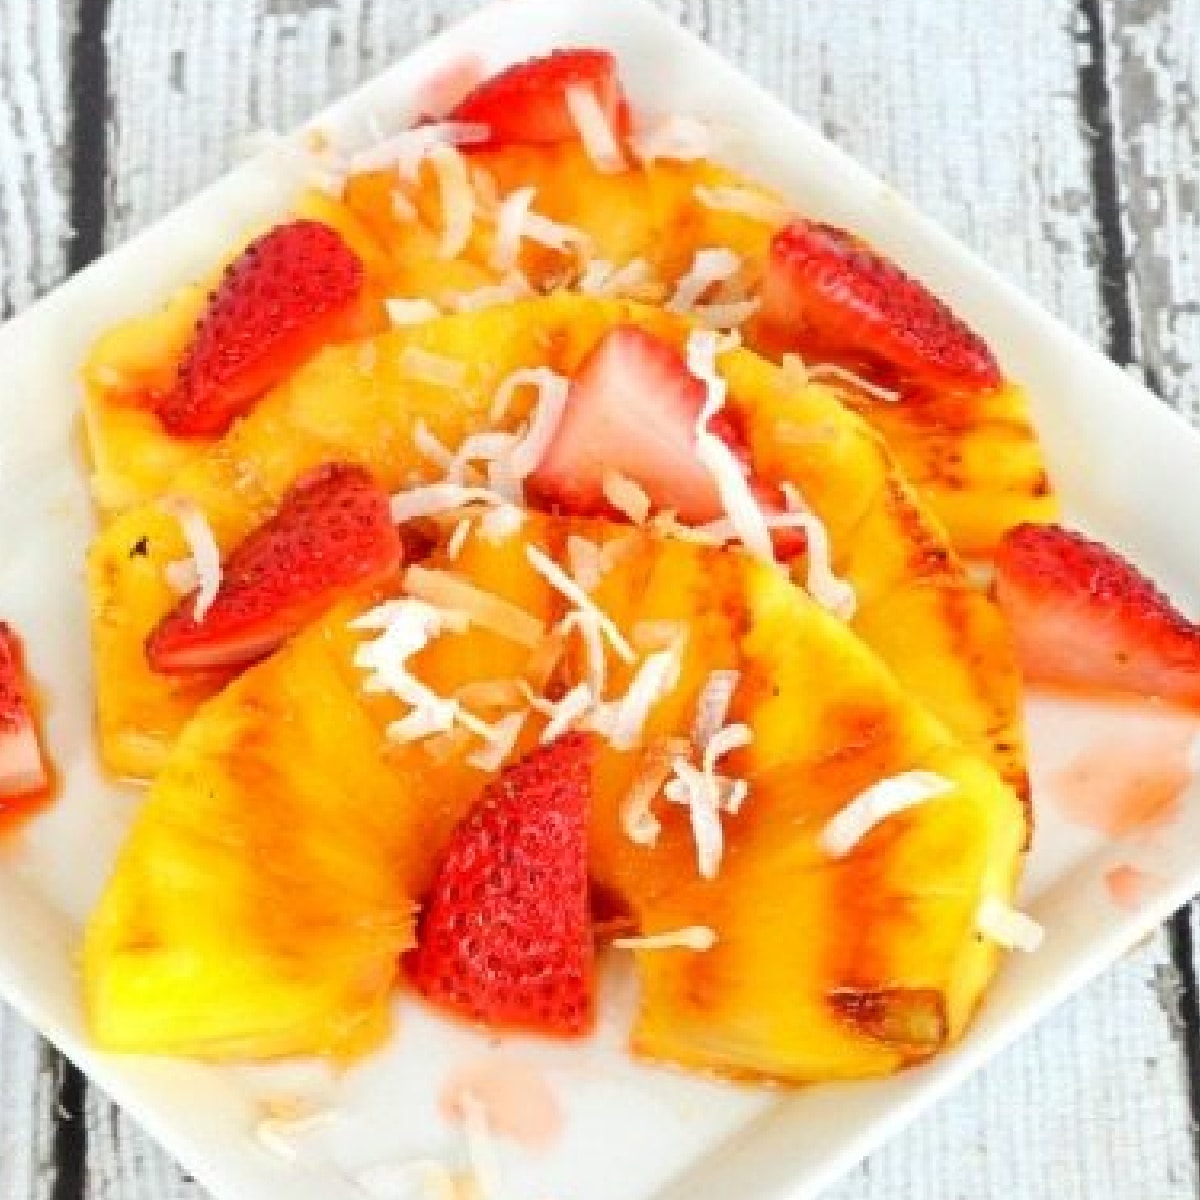 Grilled Pineapple Fruit Salad with strawberries.